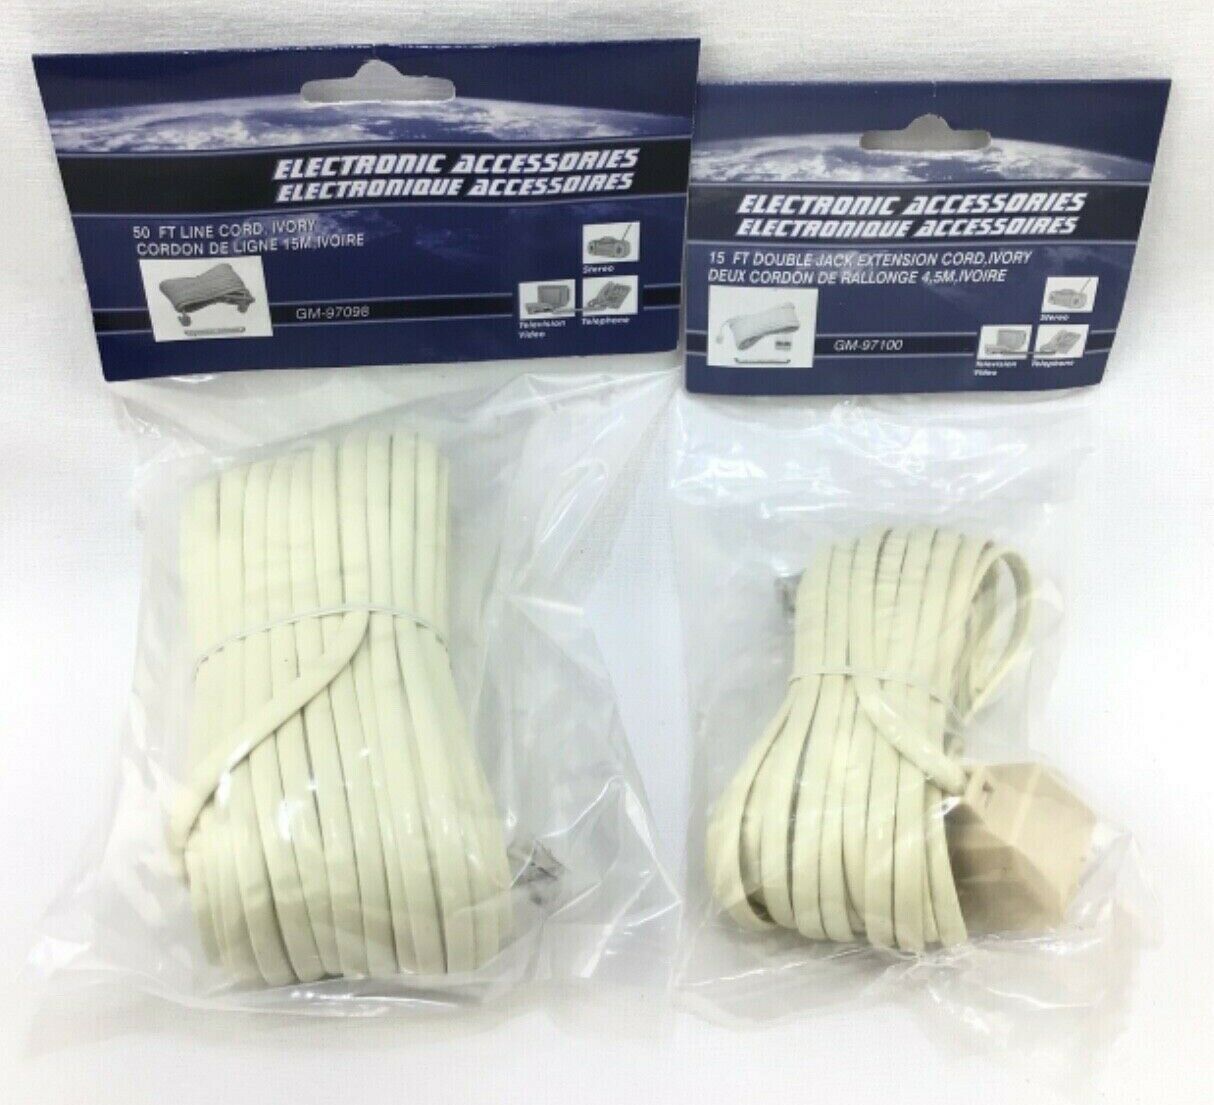 50 FT Telephone Line Cord Phone & 15 FT Double Jack Extension Cable Ivory Sealed